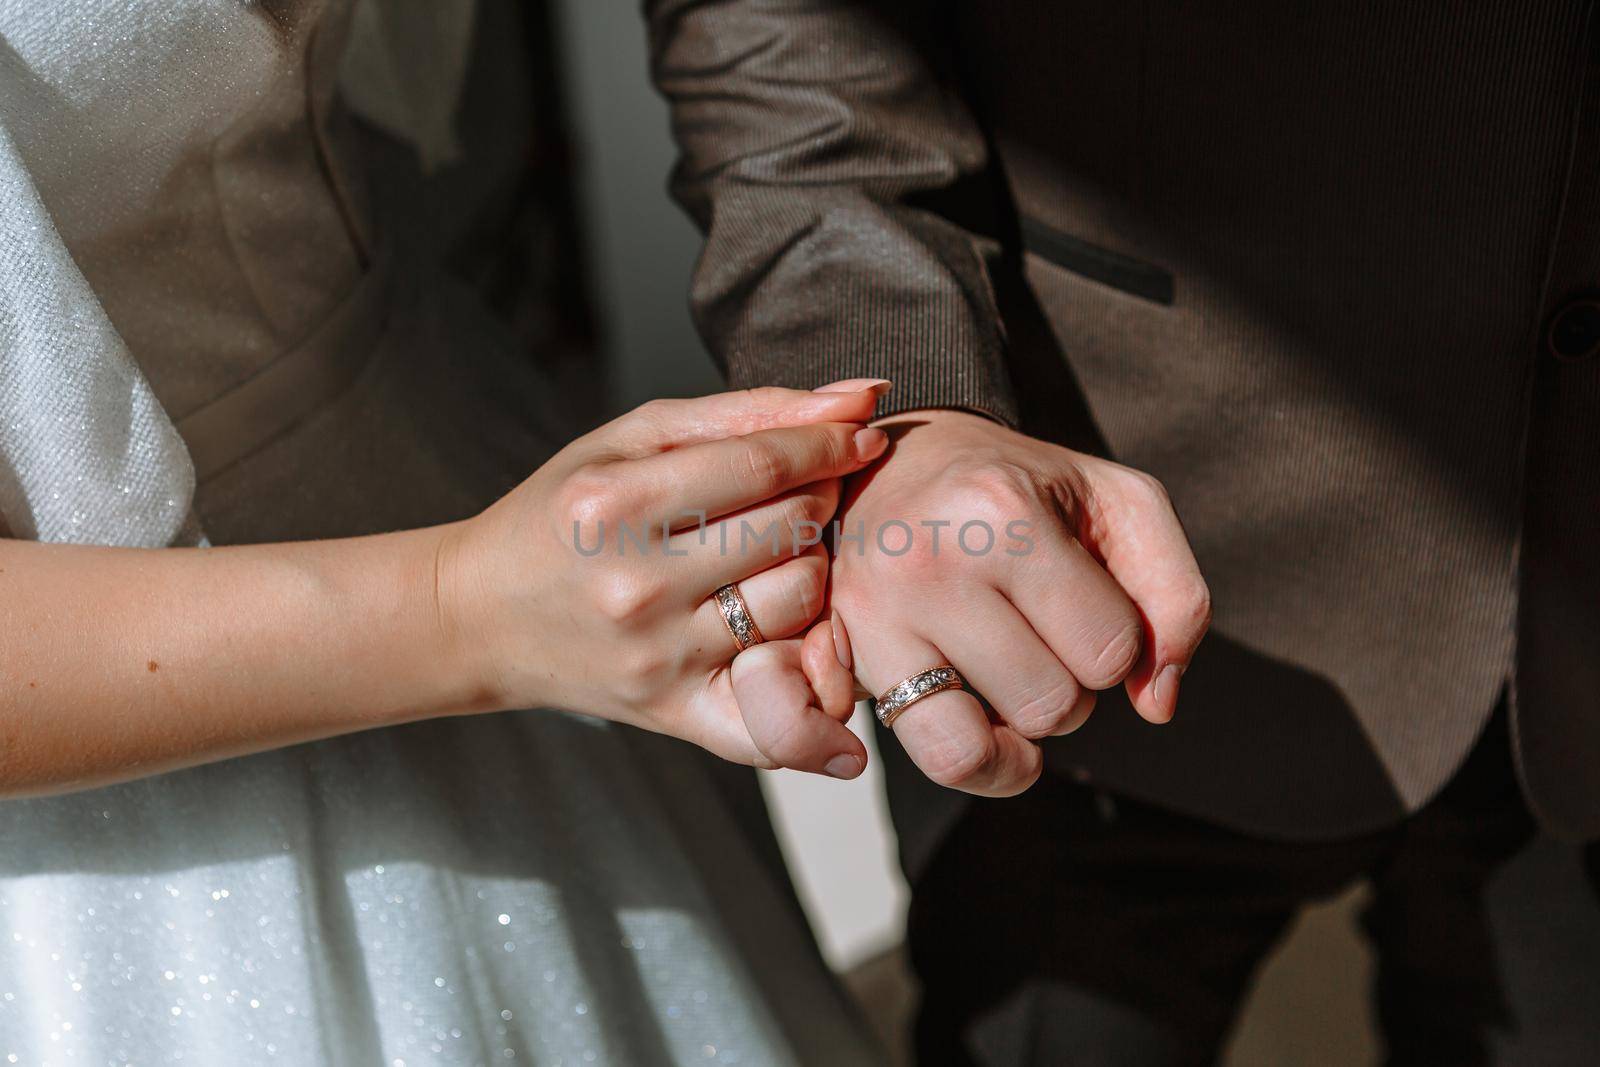 The hands of the newlyweds, which wearing wedding ring by deandy